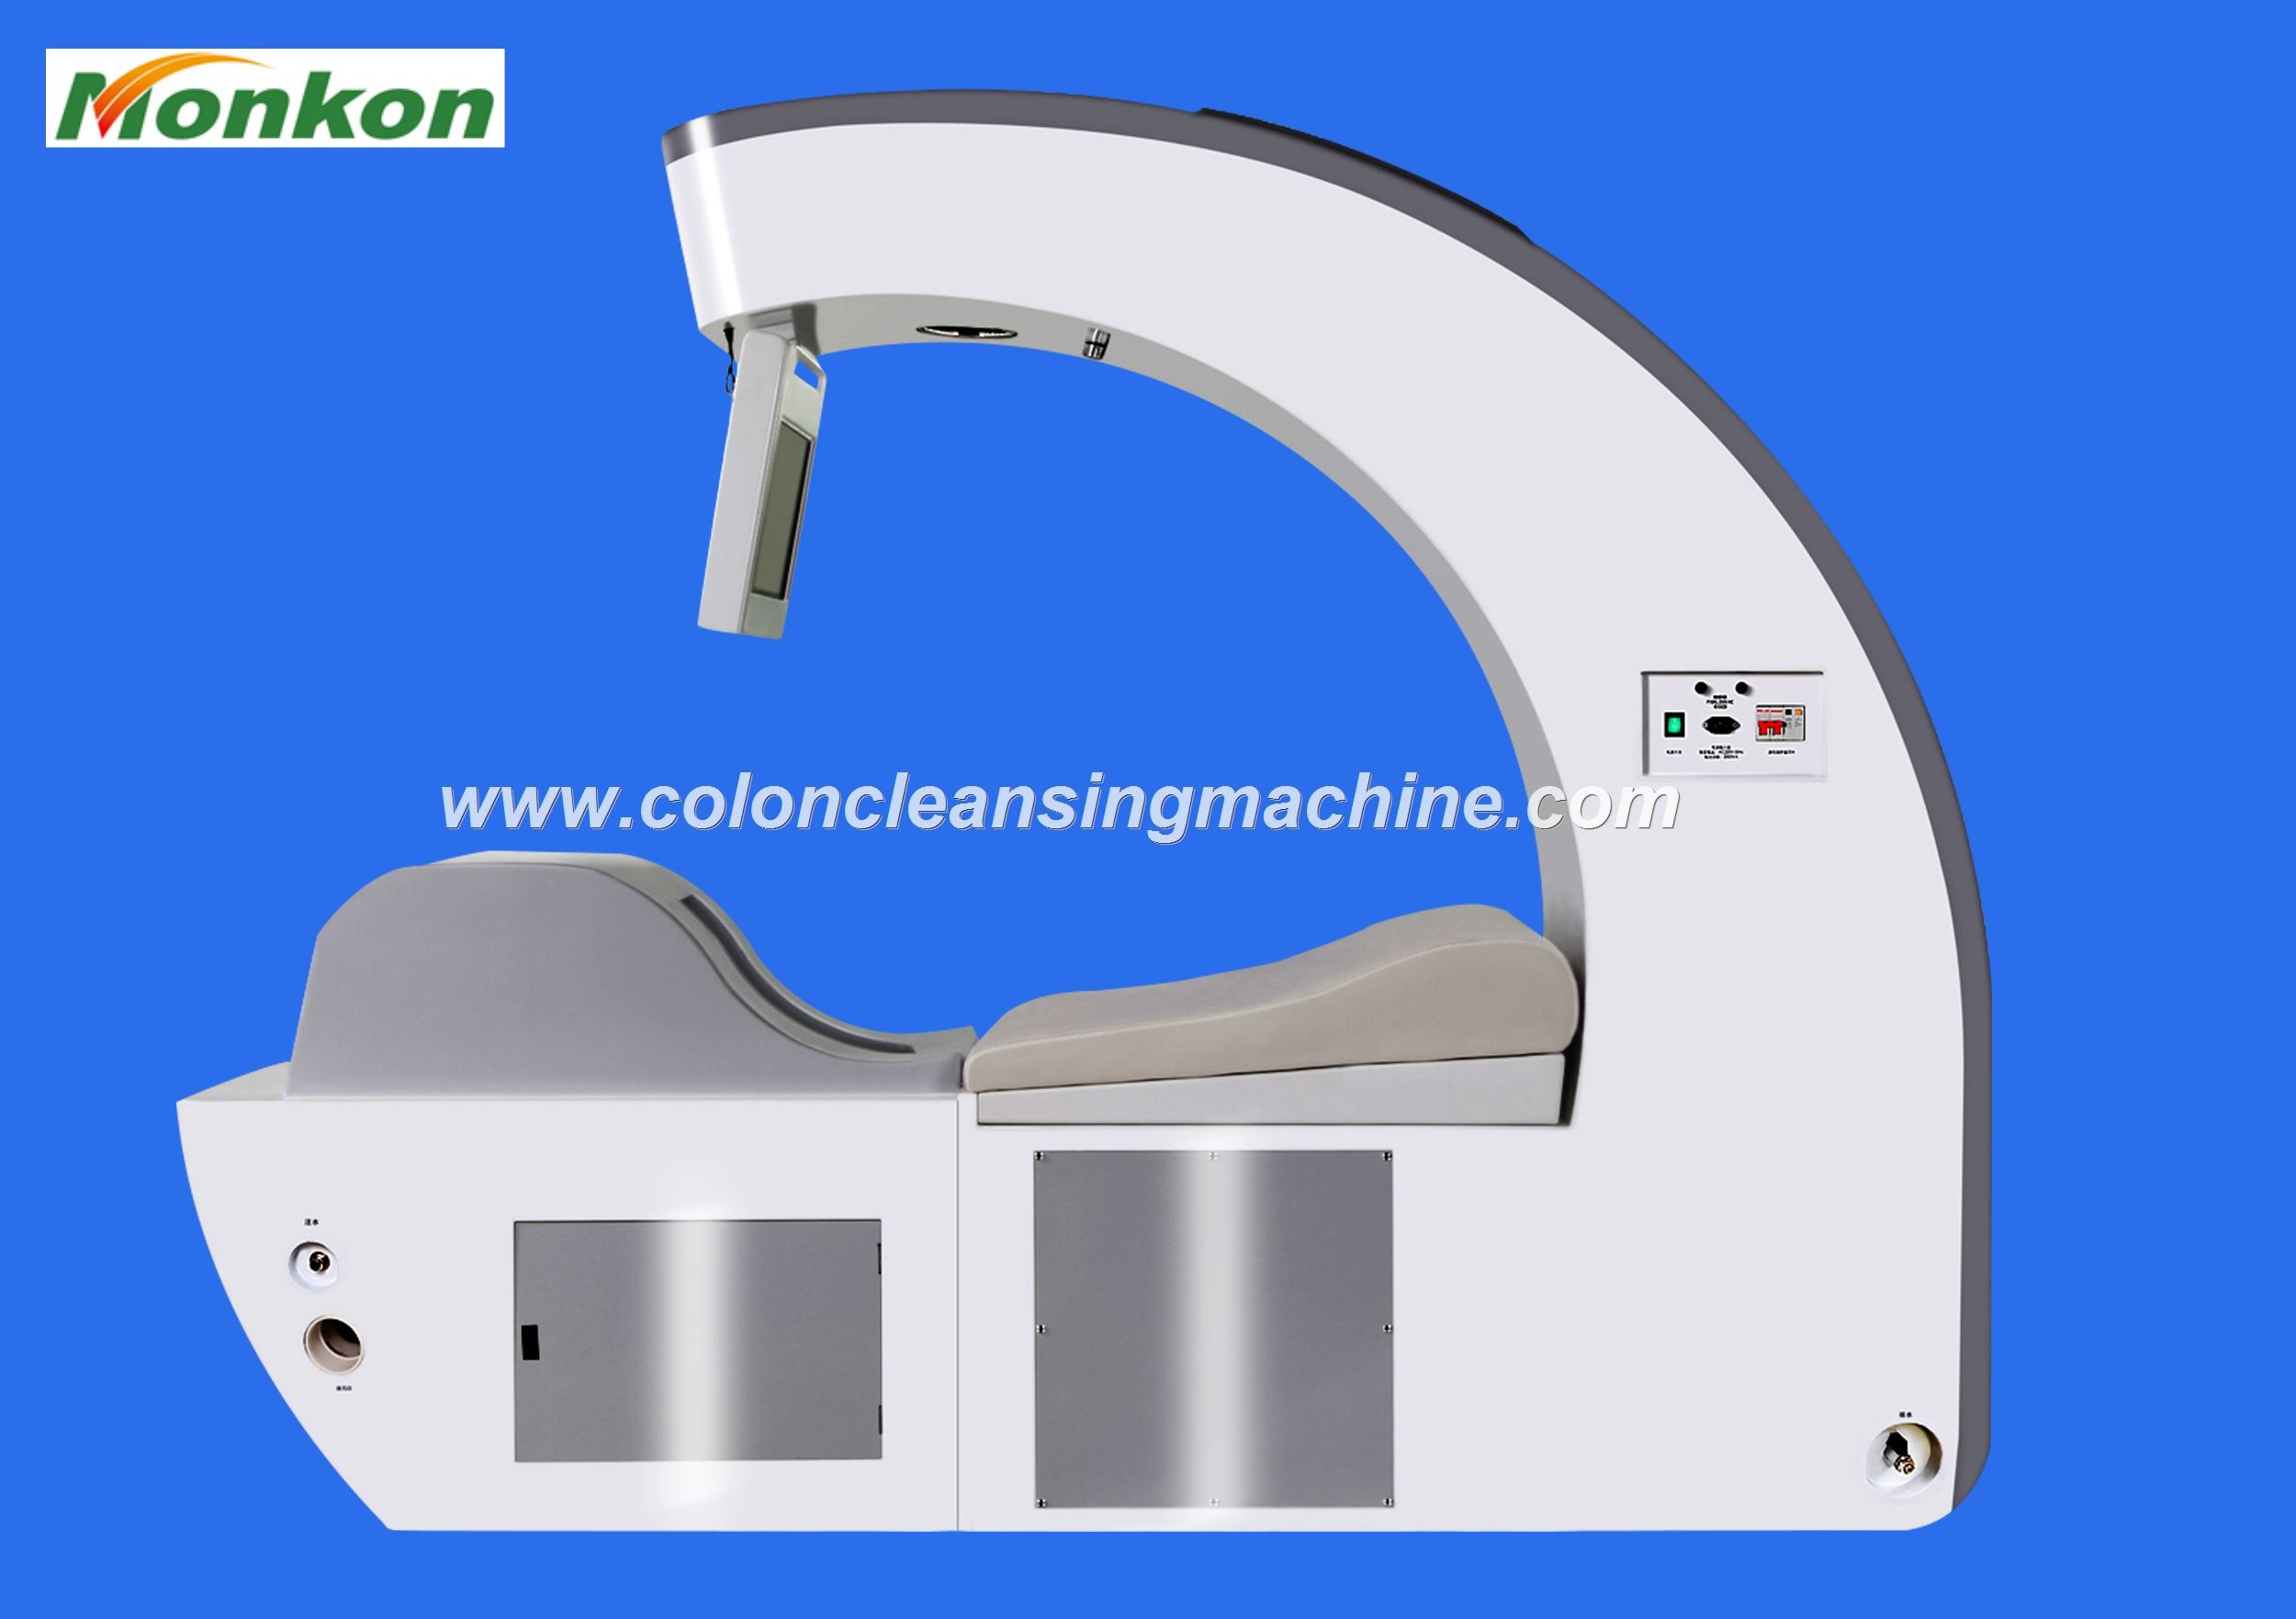 Colon Cleansing Machine at Home